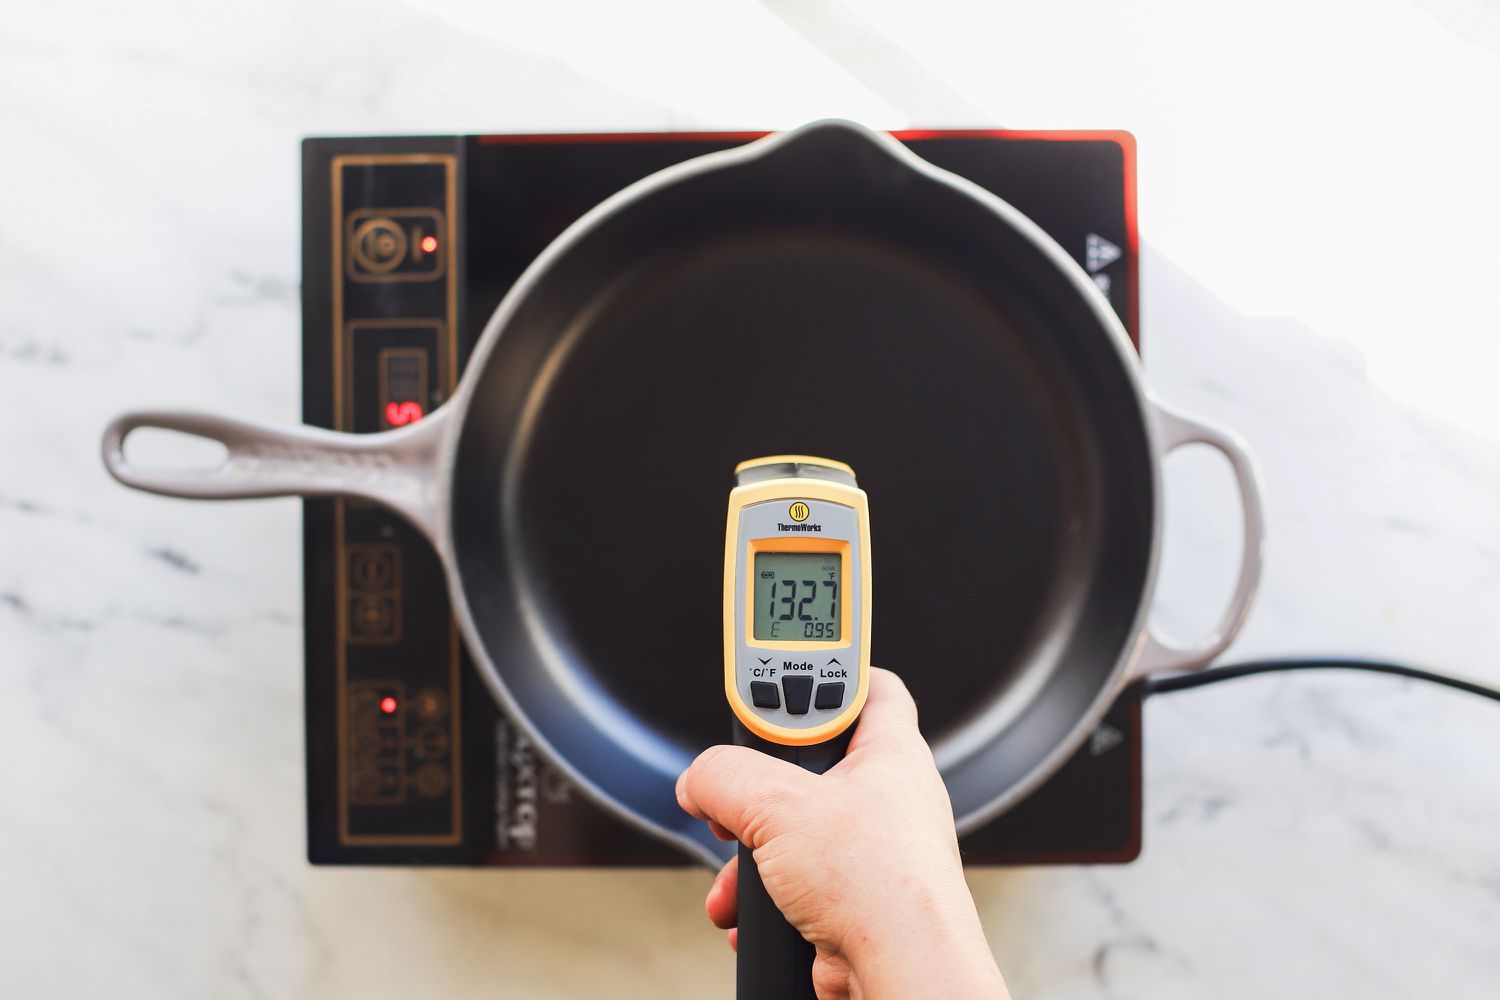 Using a infrared thermometer to take the temperature of the surface of a skillet heated on an induction burner.